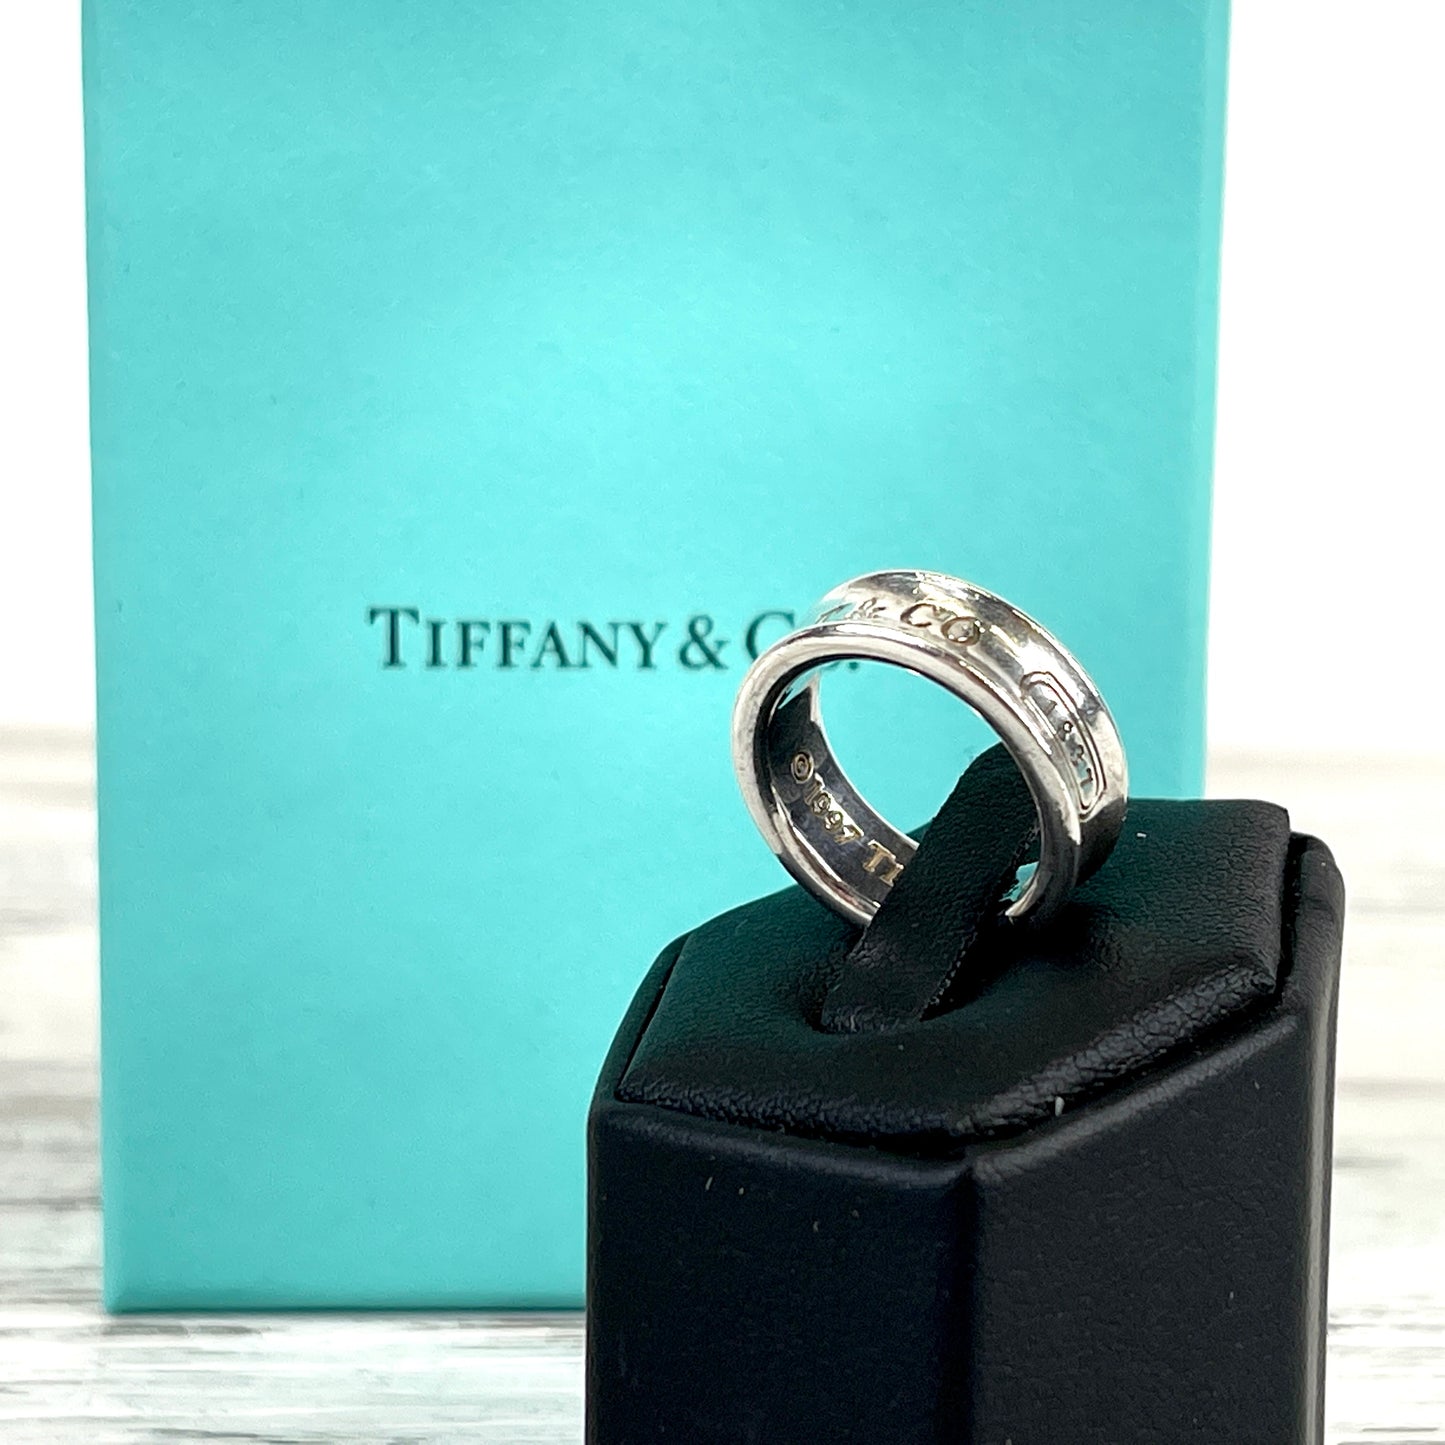 TIFFANY & CO. Sterling Silver 6" 1837 Ring